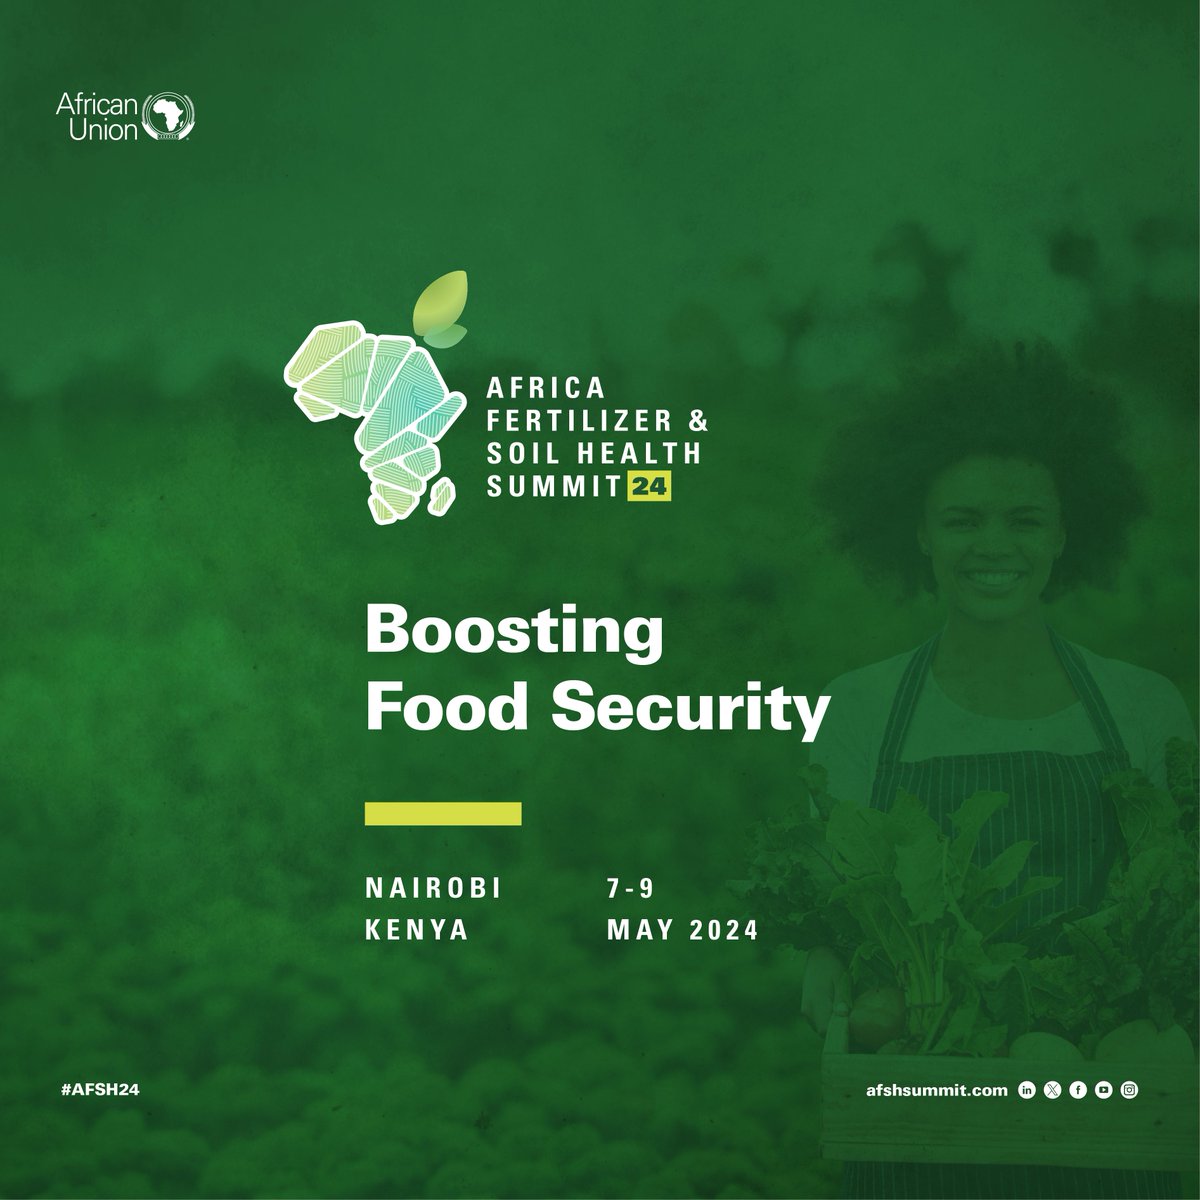 Calling all #SoilHealth enthusiasts! Mark your calendars for May 7-9, and join us in Nairobi, Kenya, for #AFSHF24. Let's listen to what the land has to say for solutions that will transform the output of Africa’s smallholder farmers! 

#Agenda2063  
#ListenToTheLand